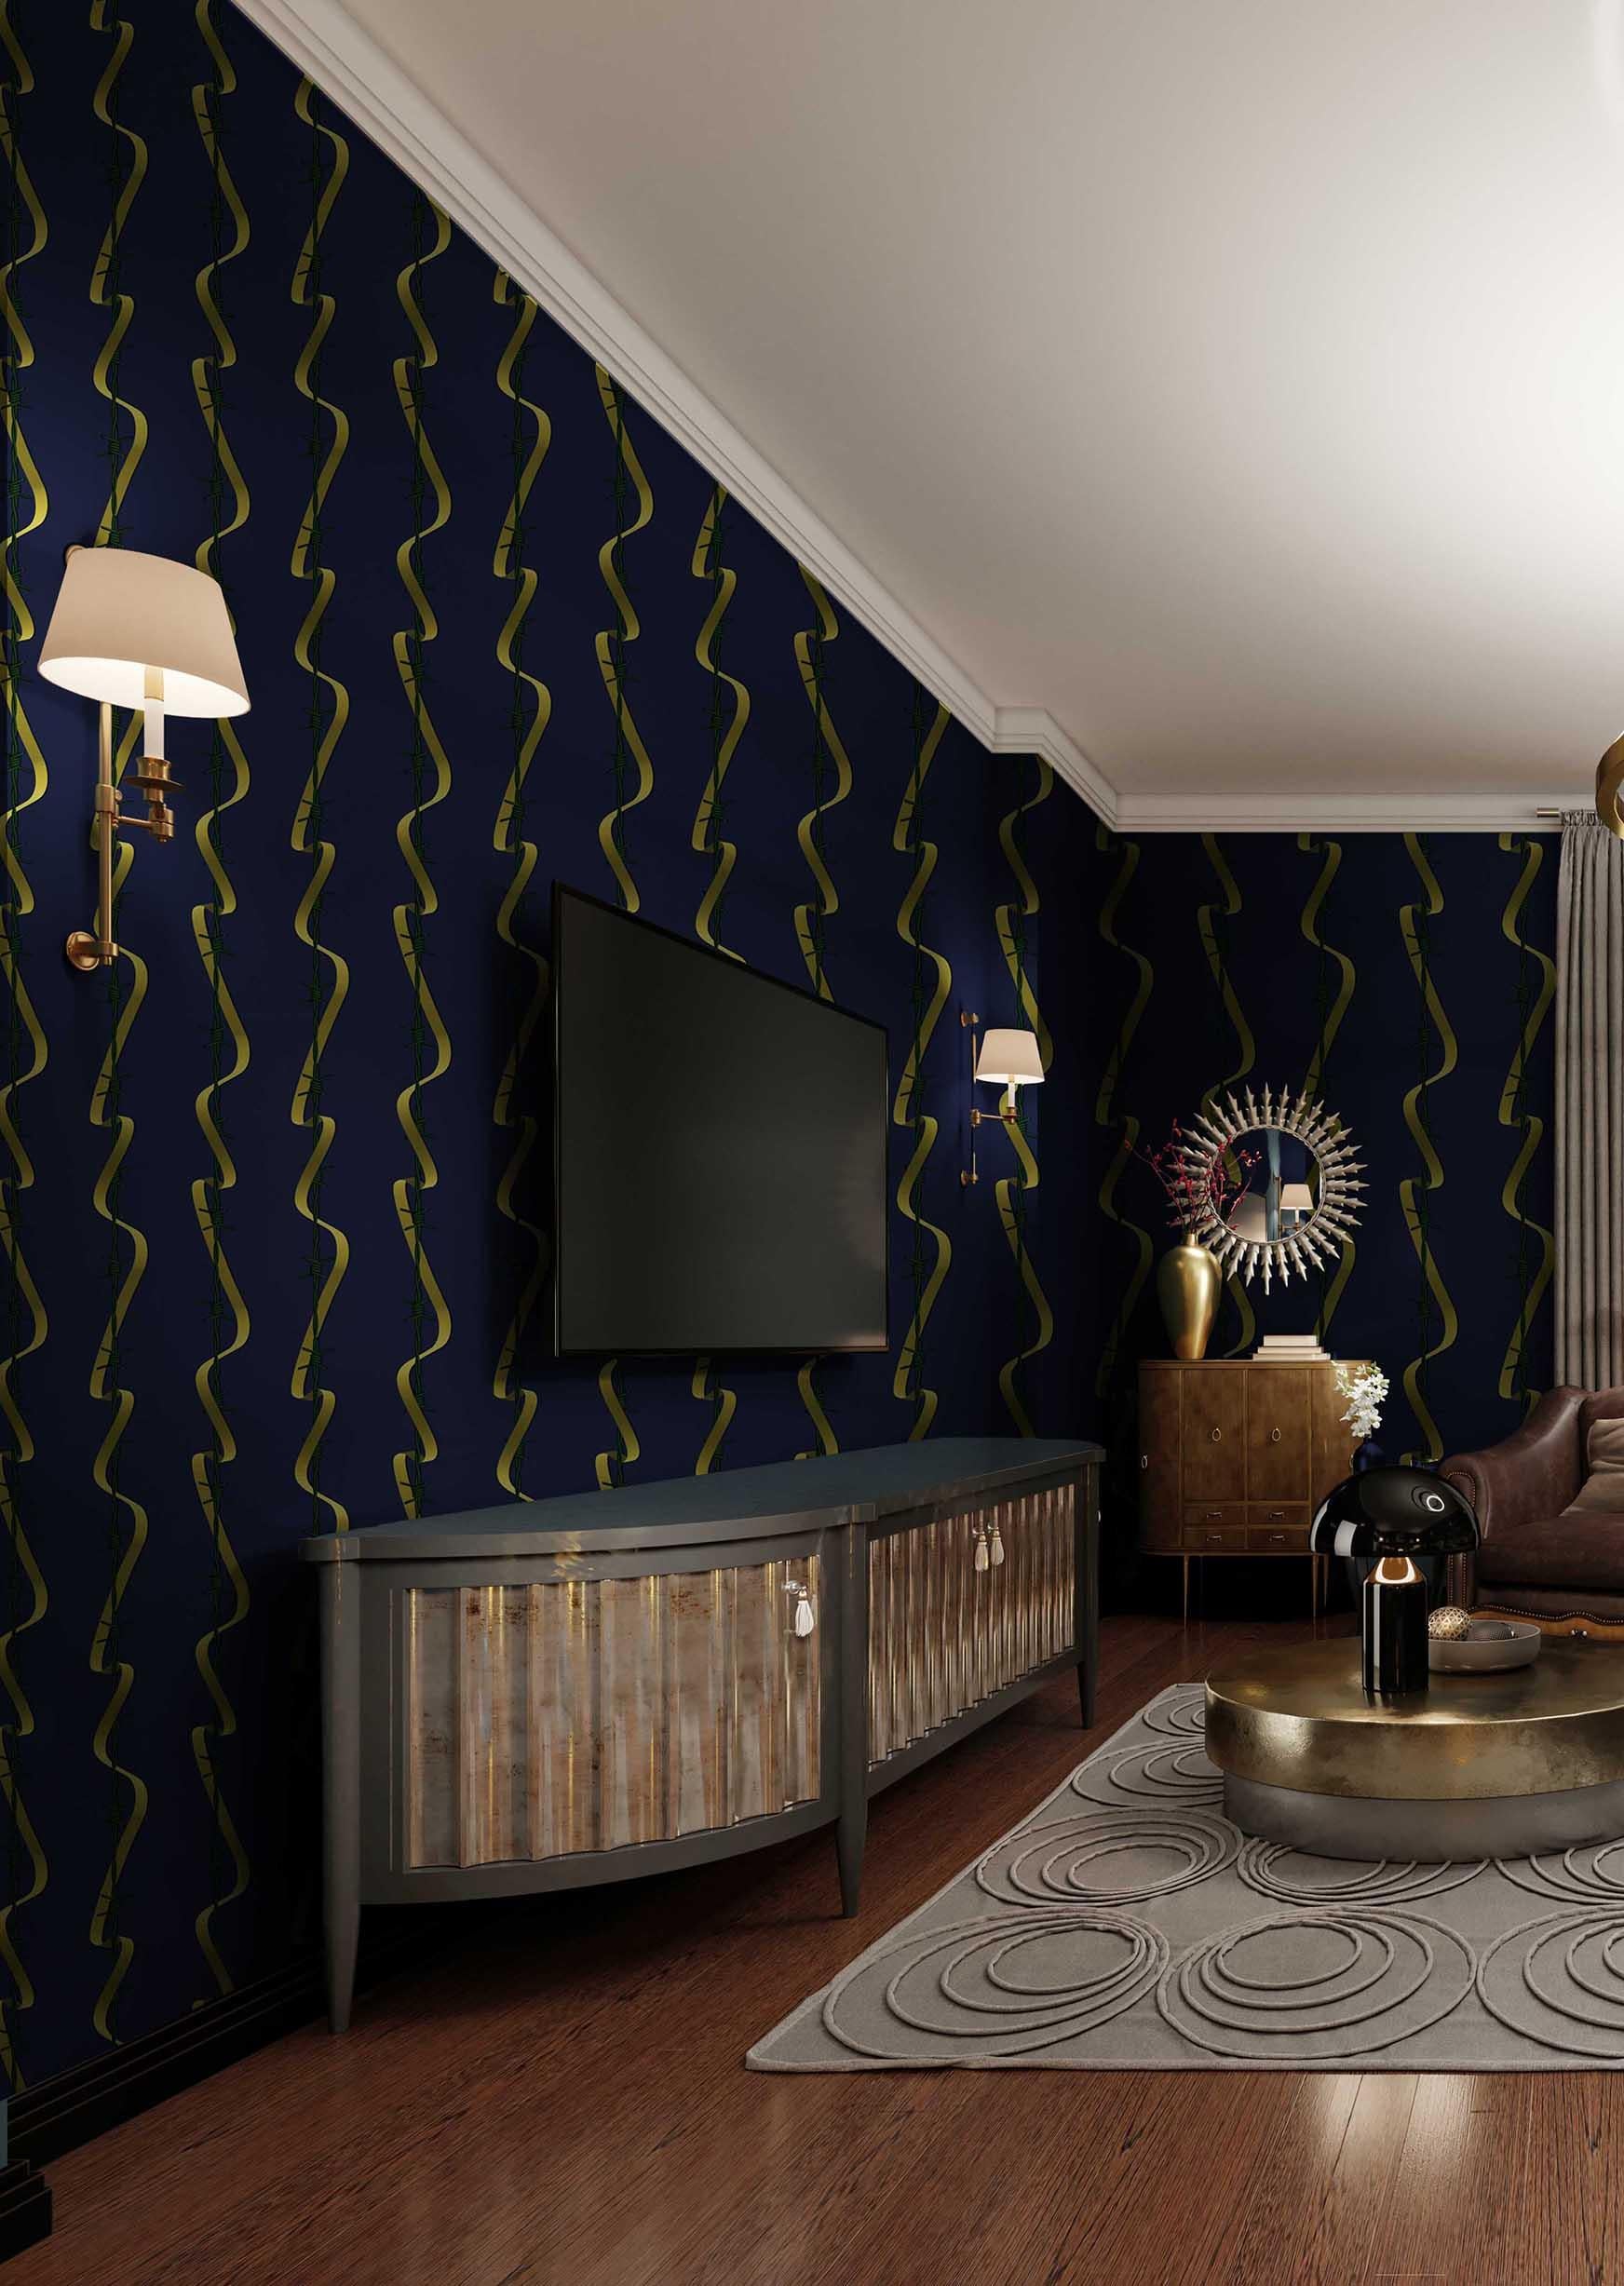 Background: Midnight Blue
Designer: Magnus Gjoen
Designed by hand in Digital Art
Project Miscellanea
Graphic dev: Pattern
Collection: Racconti
Made in: Italy

Printing support: fine Art ( front 50% cellulose, back non-woven backing
Greenguard Gold